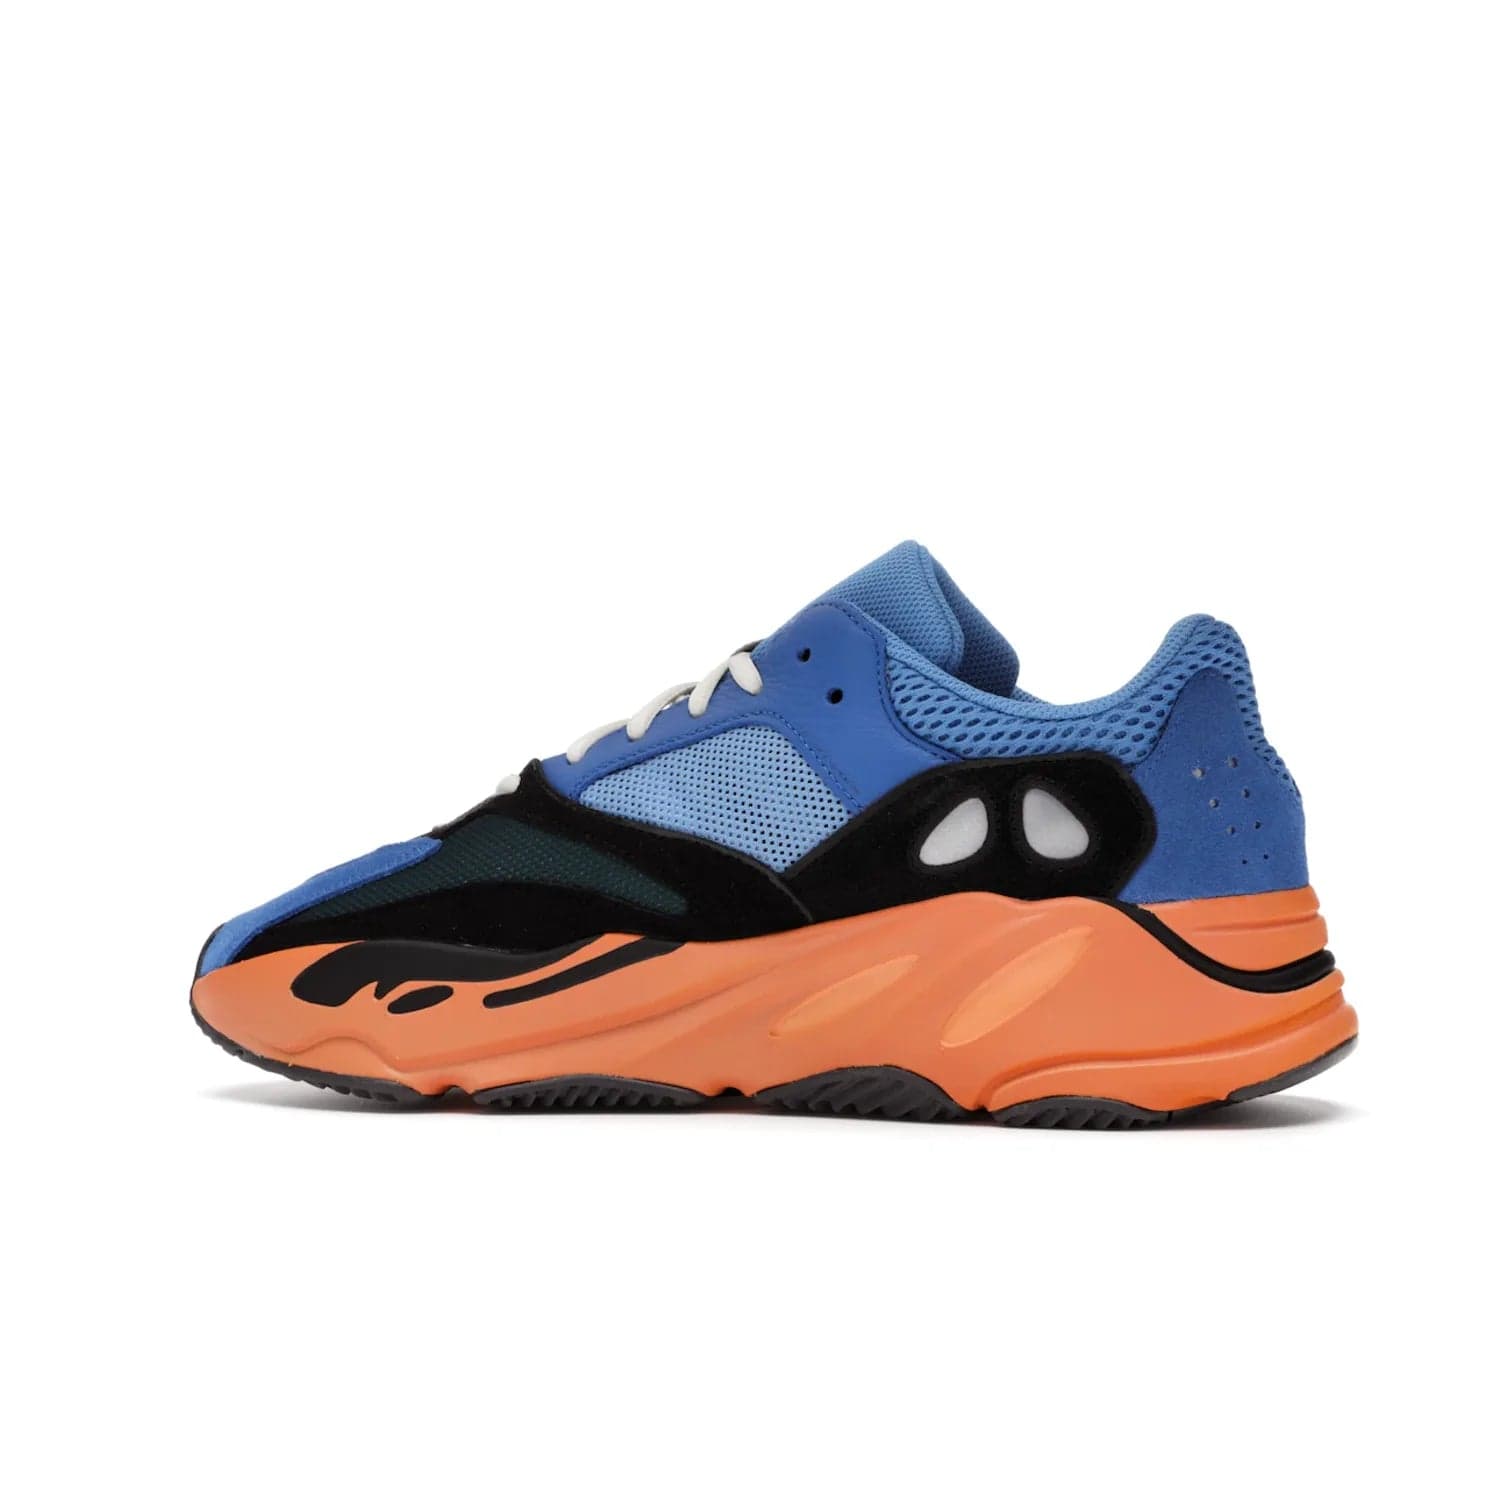 adidas Yeezy Boost 700 Bright Blue - Image 21 - Only at www.BallersClubKickz.com - Iconic sneaker style meets vibrant colour with the adidas Yeezy Boost 700 Bright Blue. Reflective accents, turquoise and teal panels, bright orange midsole and black outsole make for a bold release. April 2021.